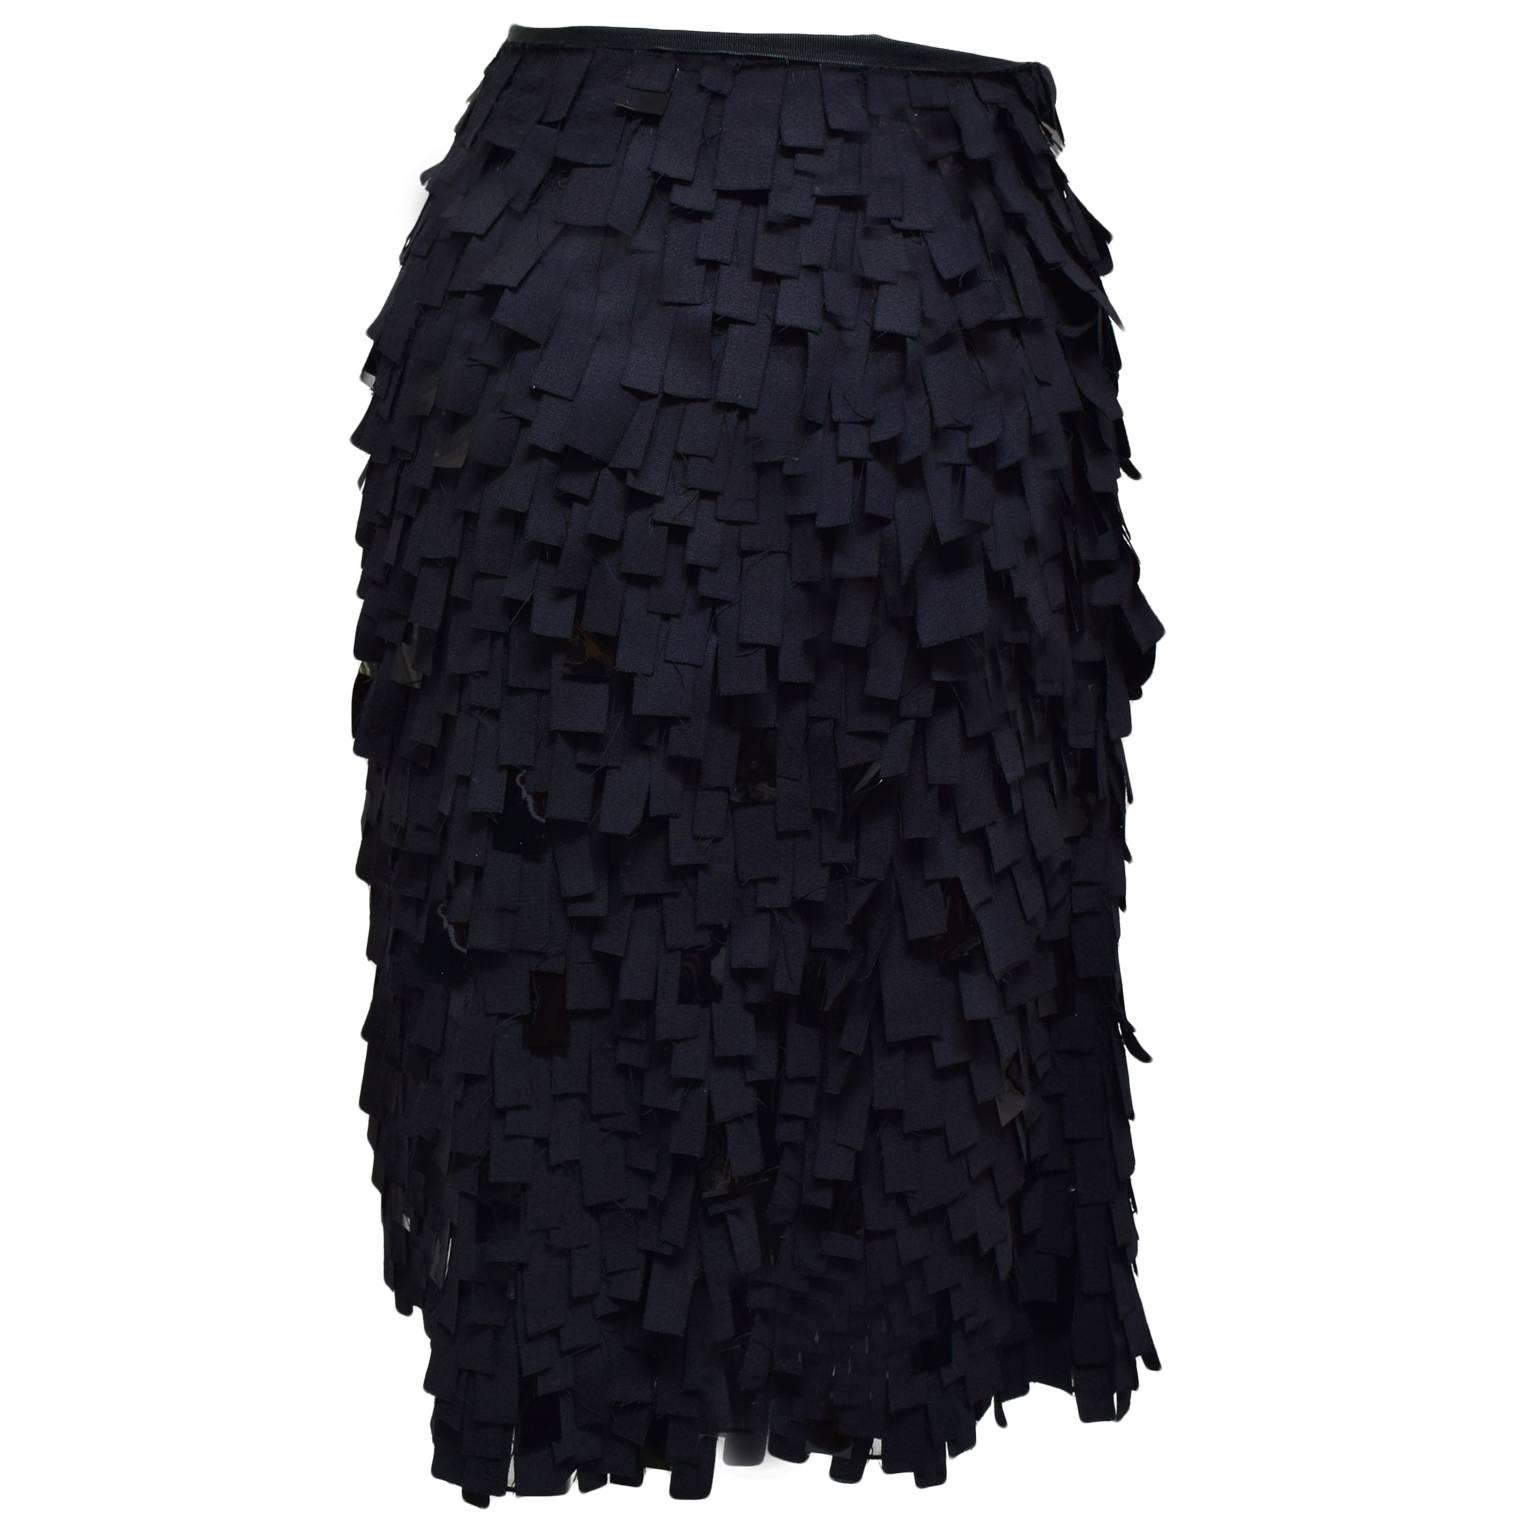 This Carolina skirt is probably the coolest piece you've seen in a while. Made entirely by strips of rich linen fabric this technique give this skirt texture, body and style. Fully lined.